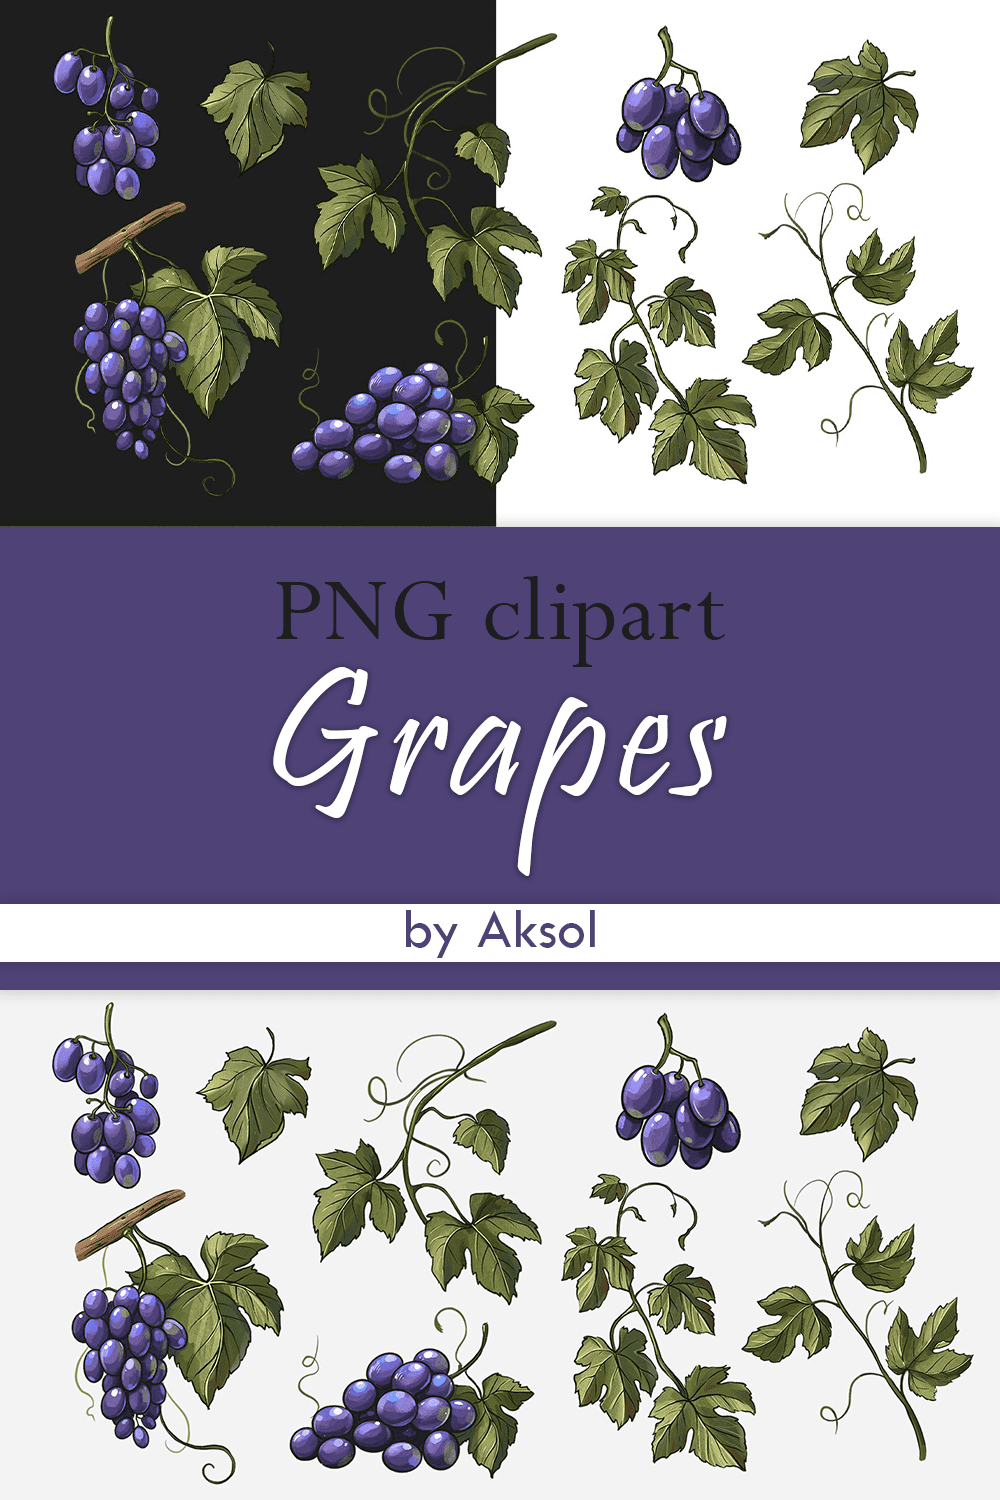 Grapes. png clipart - pinterest image preview.